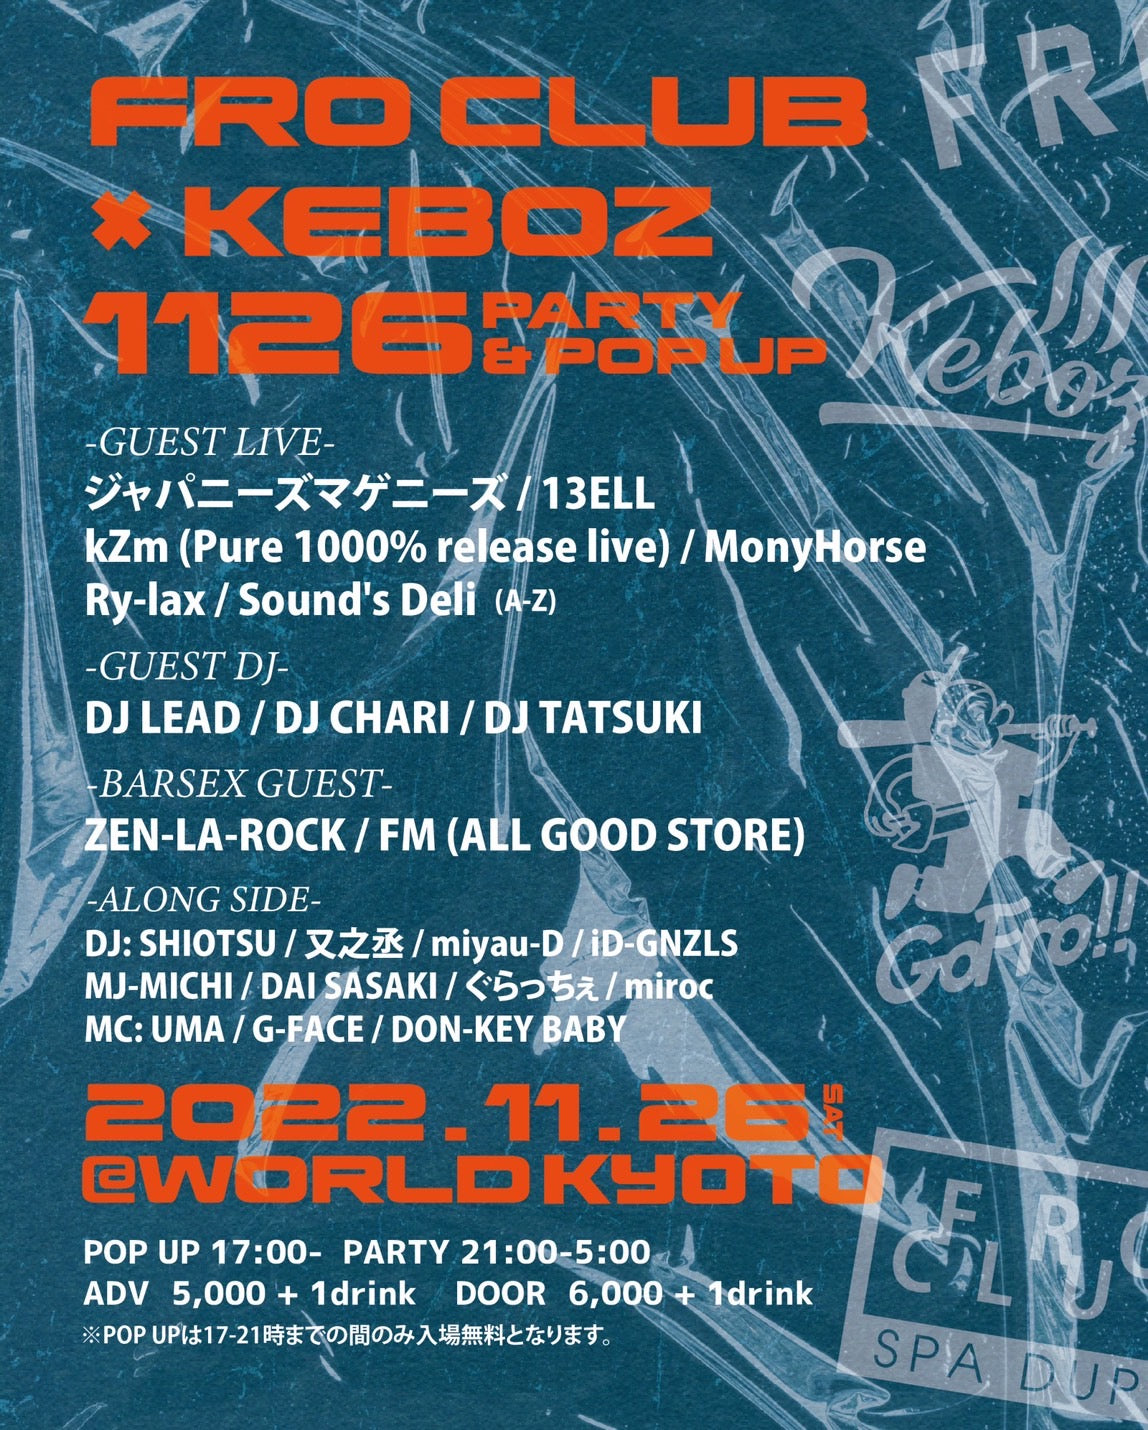 Froclub x KEBOZ 1126 Party & Pop Up